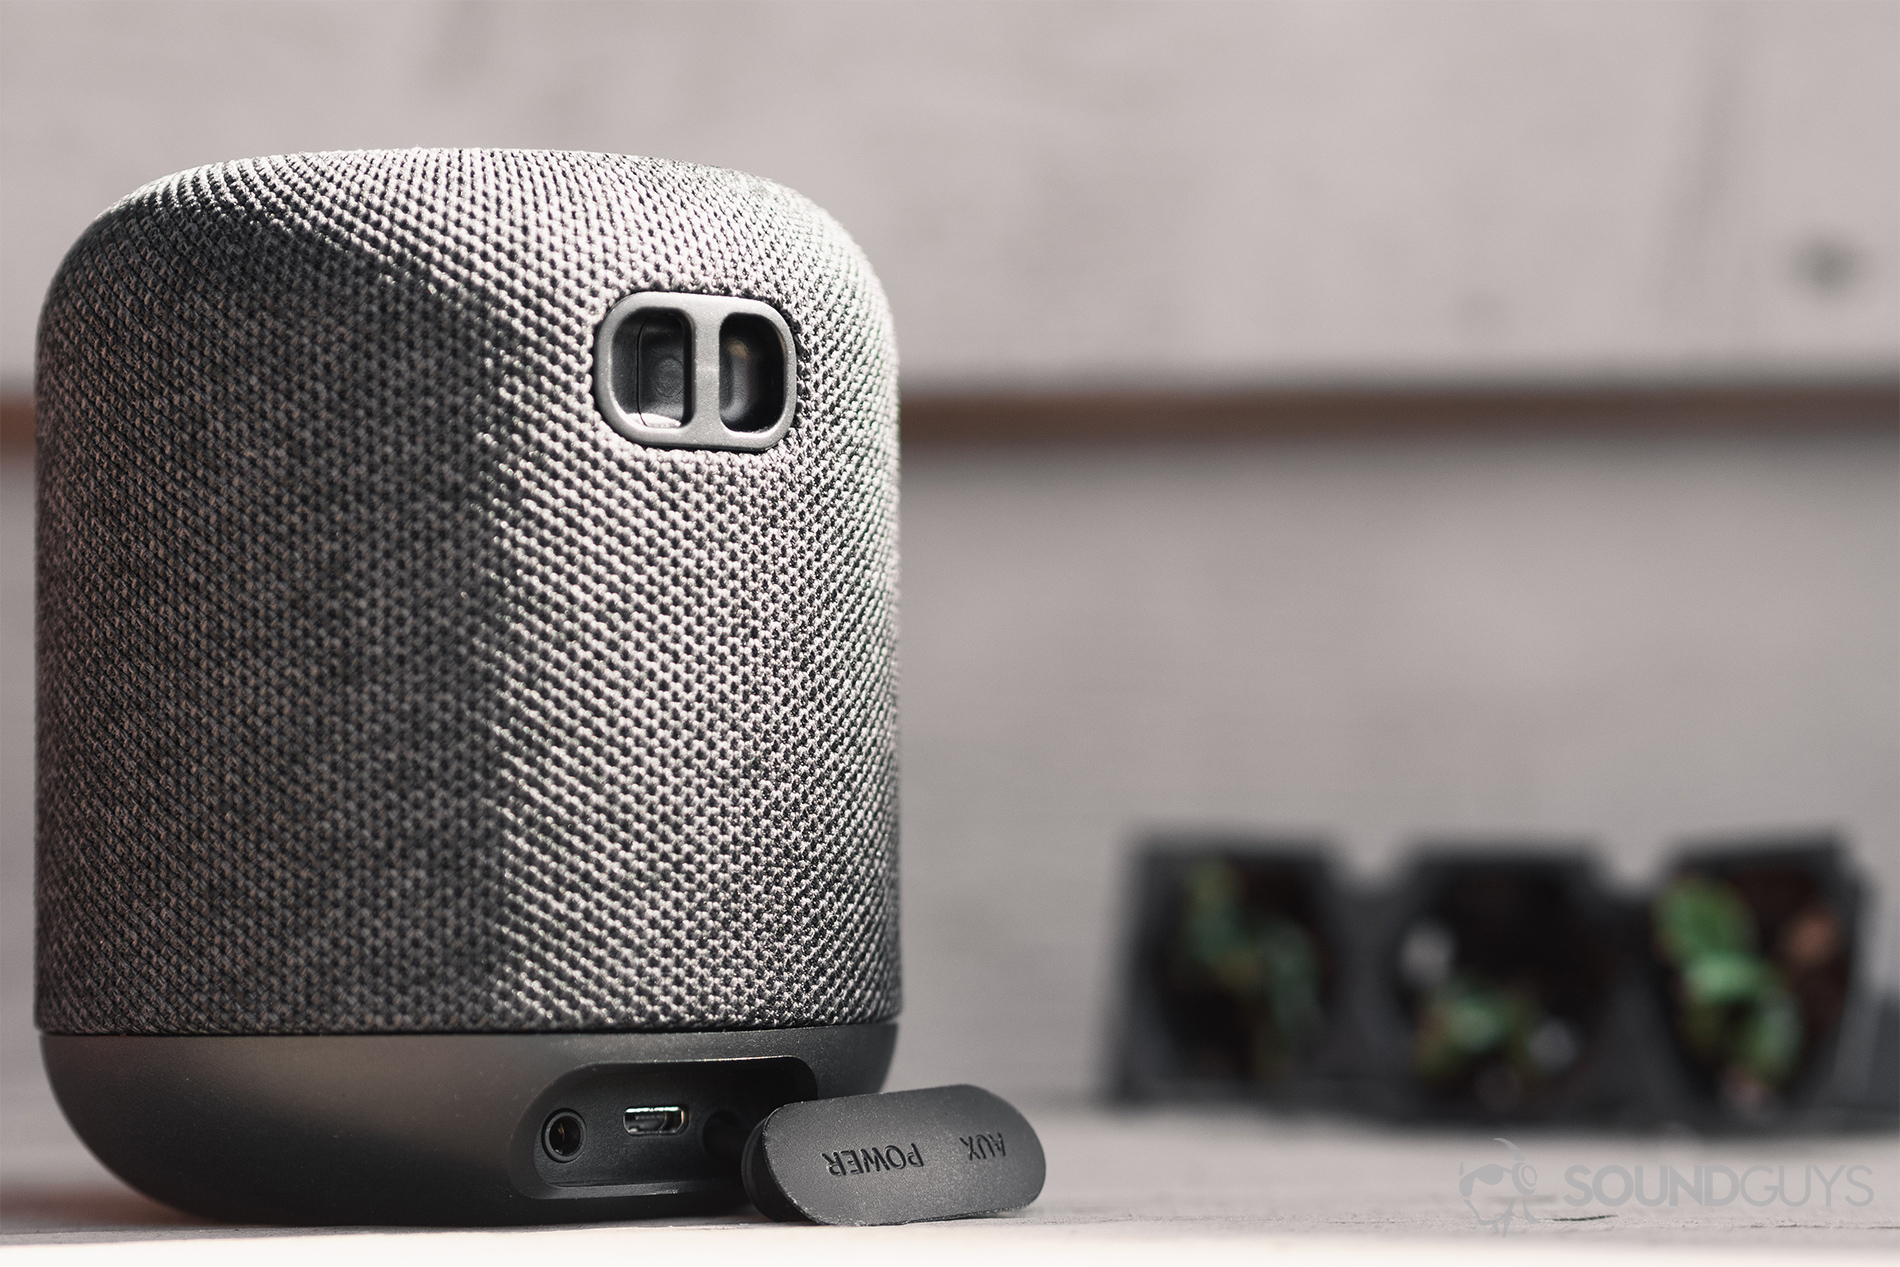 Anker Soundcore Motion Q review: An offset image of the speaker to show off the dedicated mounting mechanism.